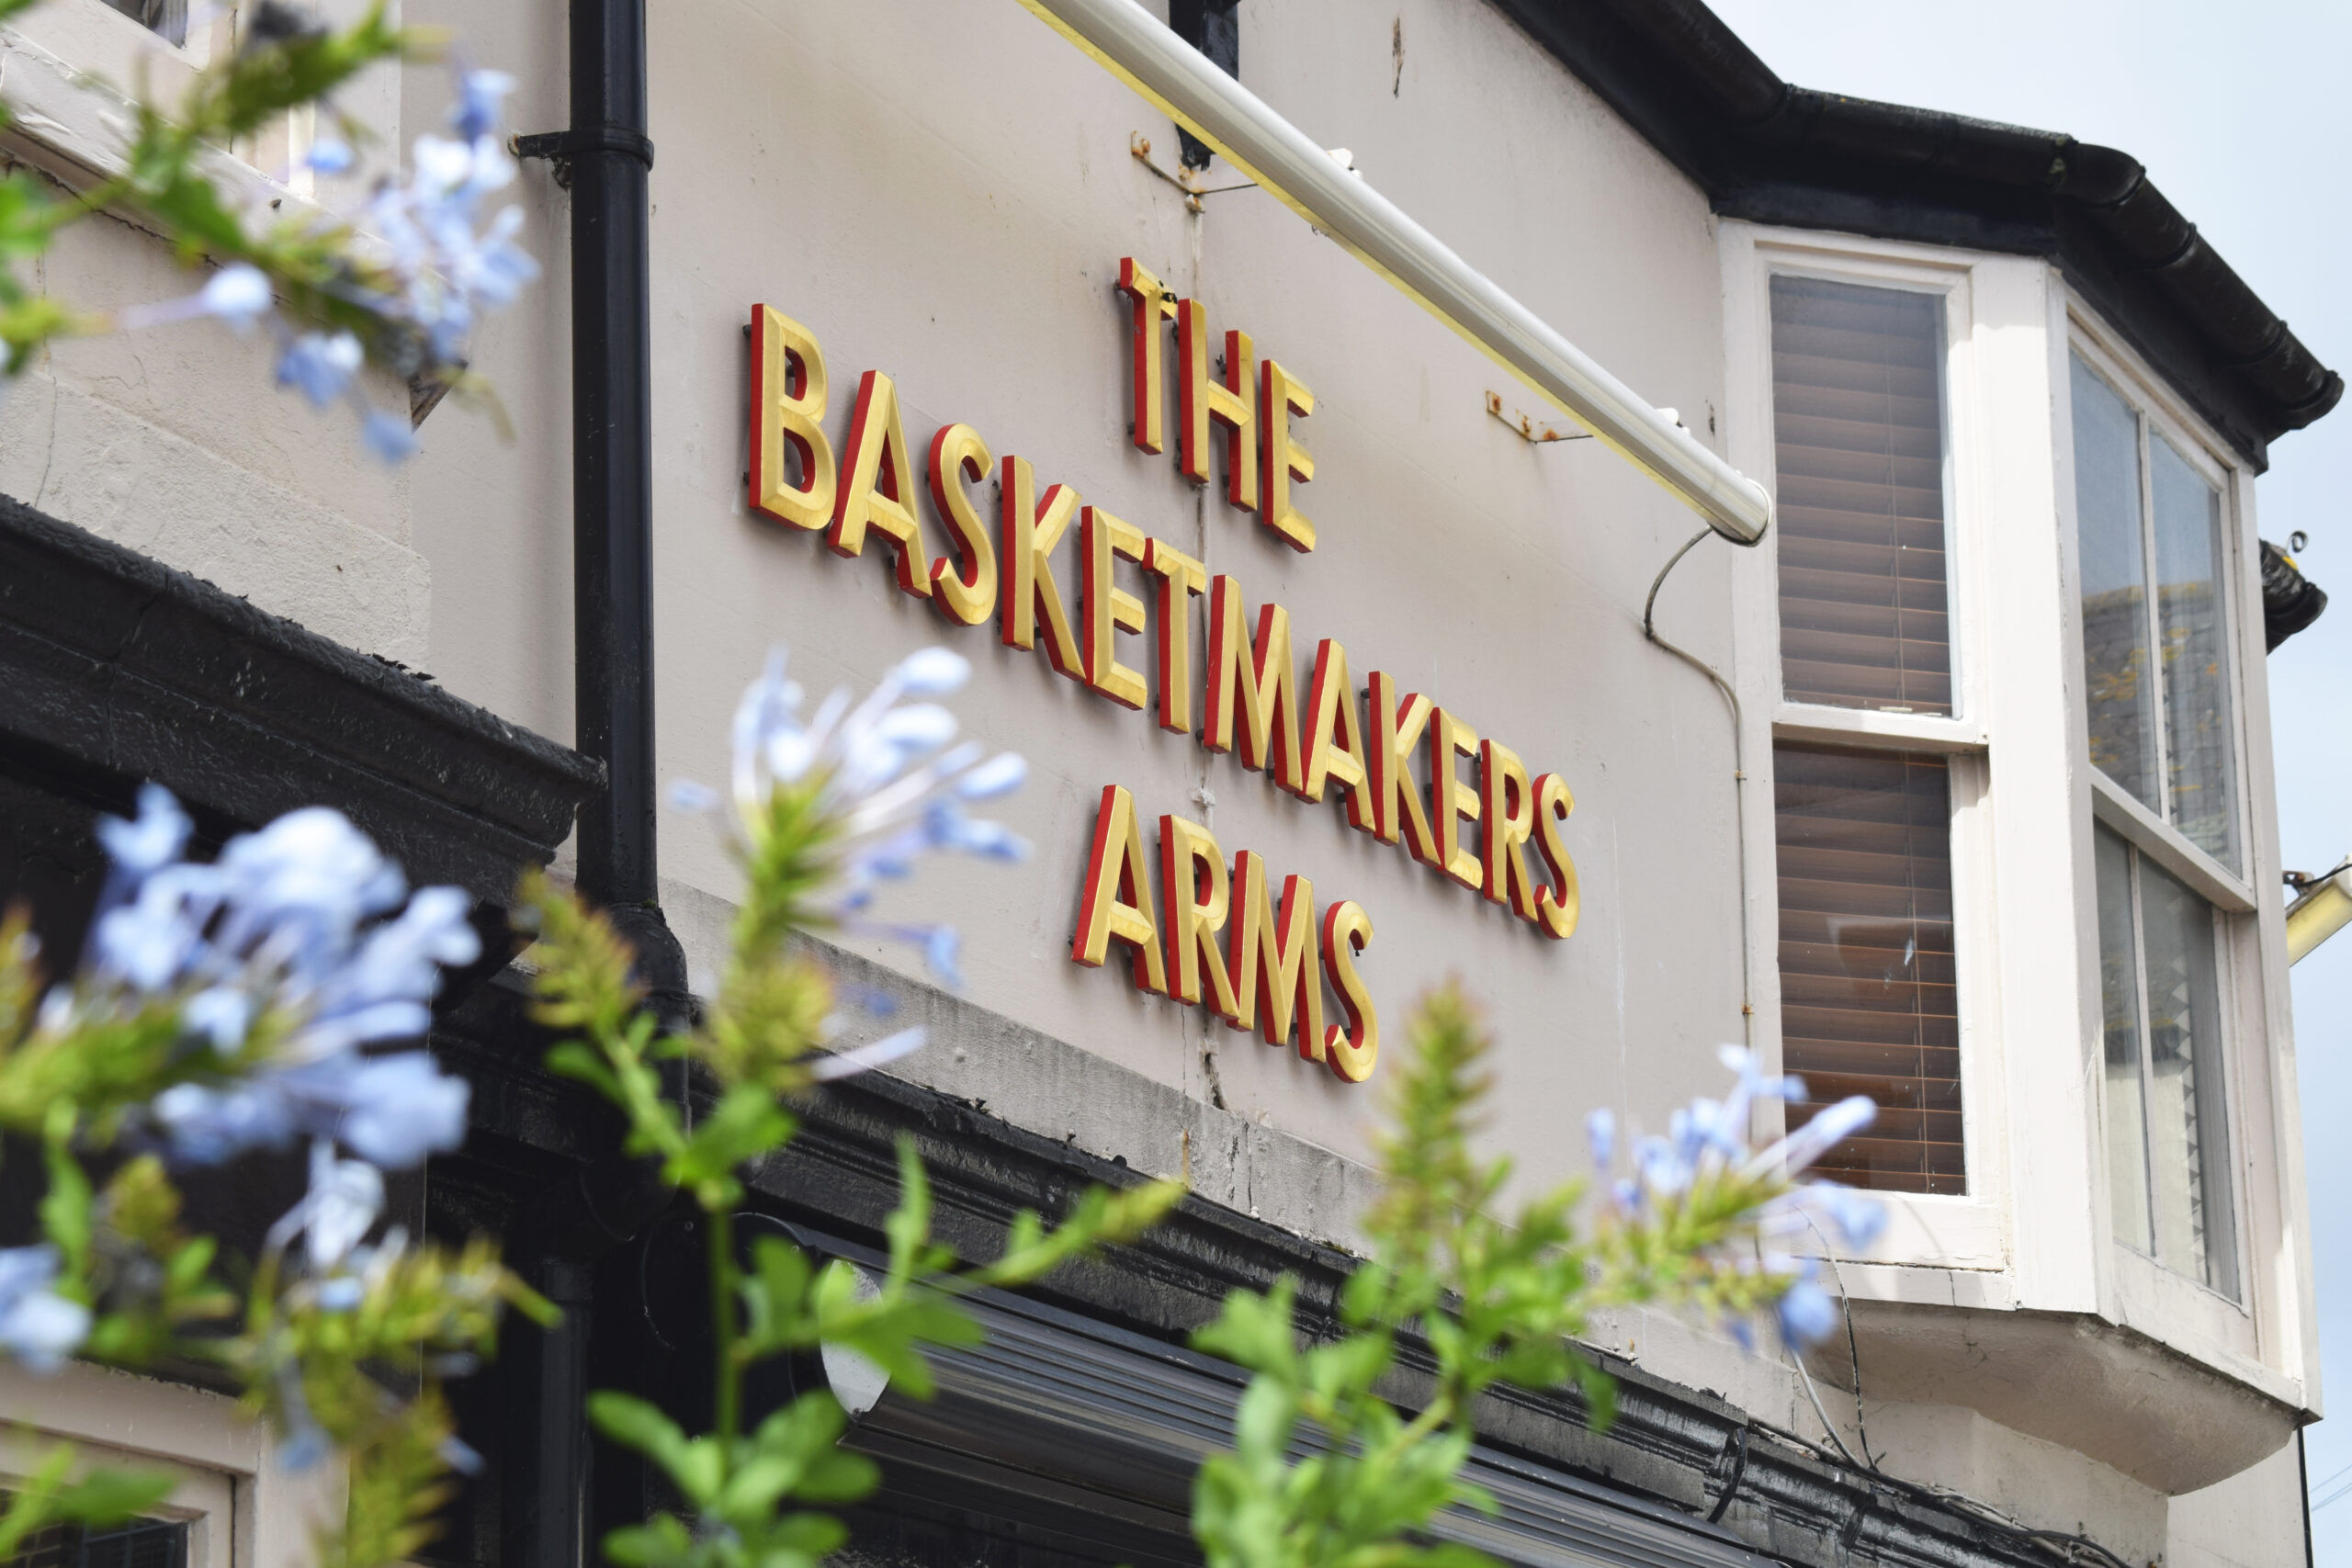 The Basketmakers Arms Brighton. Name of the pub written in gold with a creamy white facade. In the foreground you can see the pubs window box flowers. 